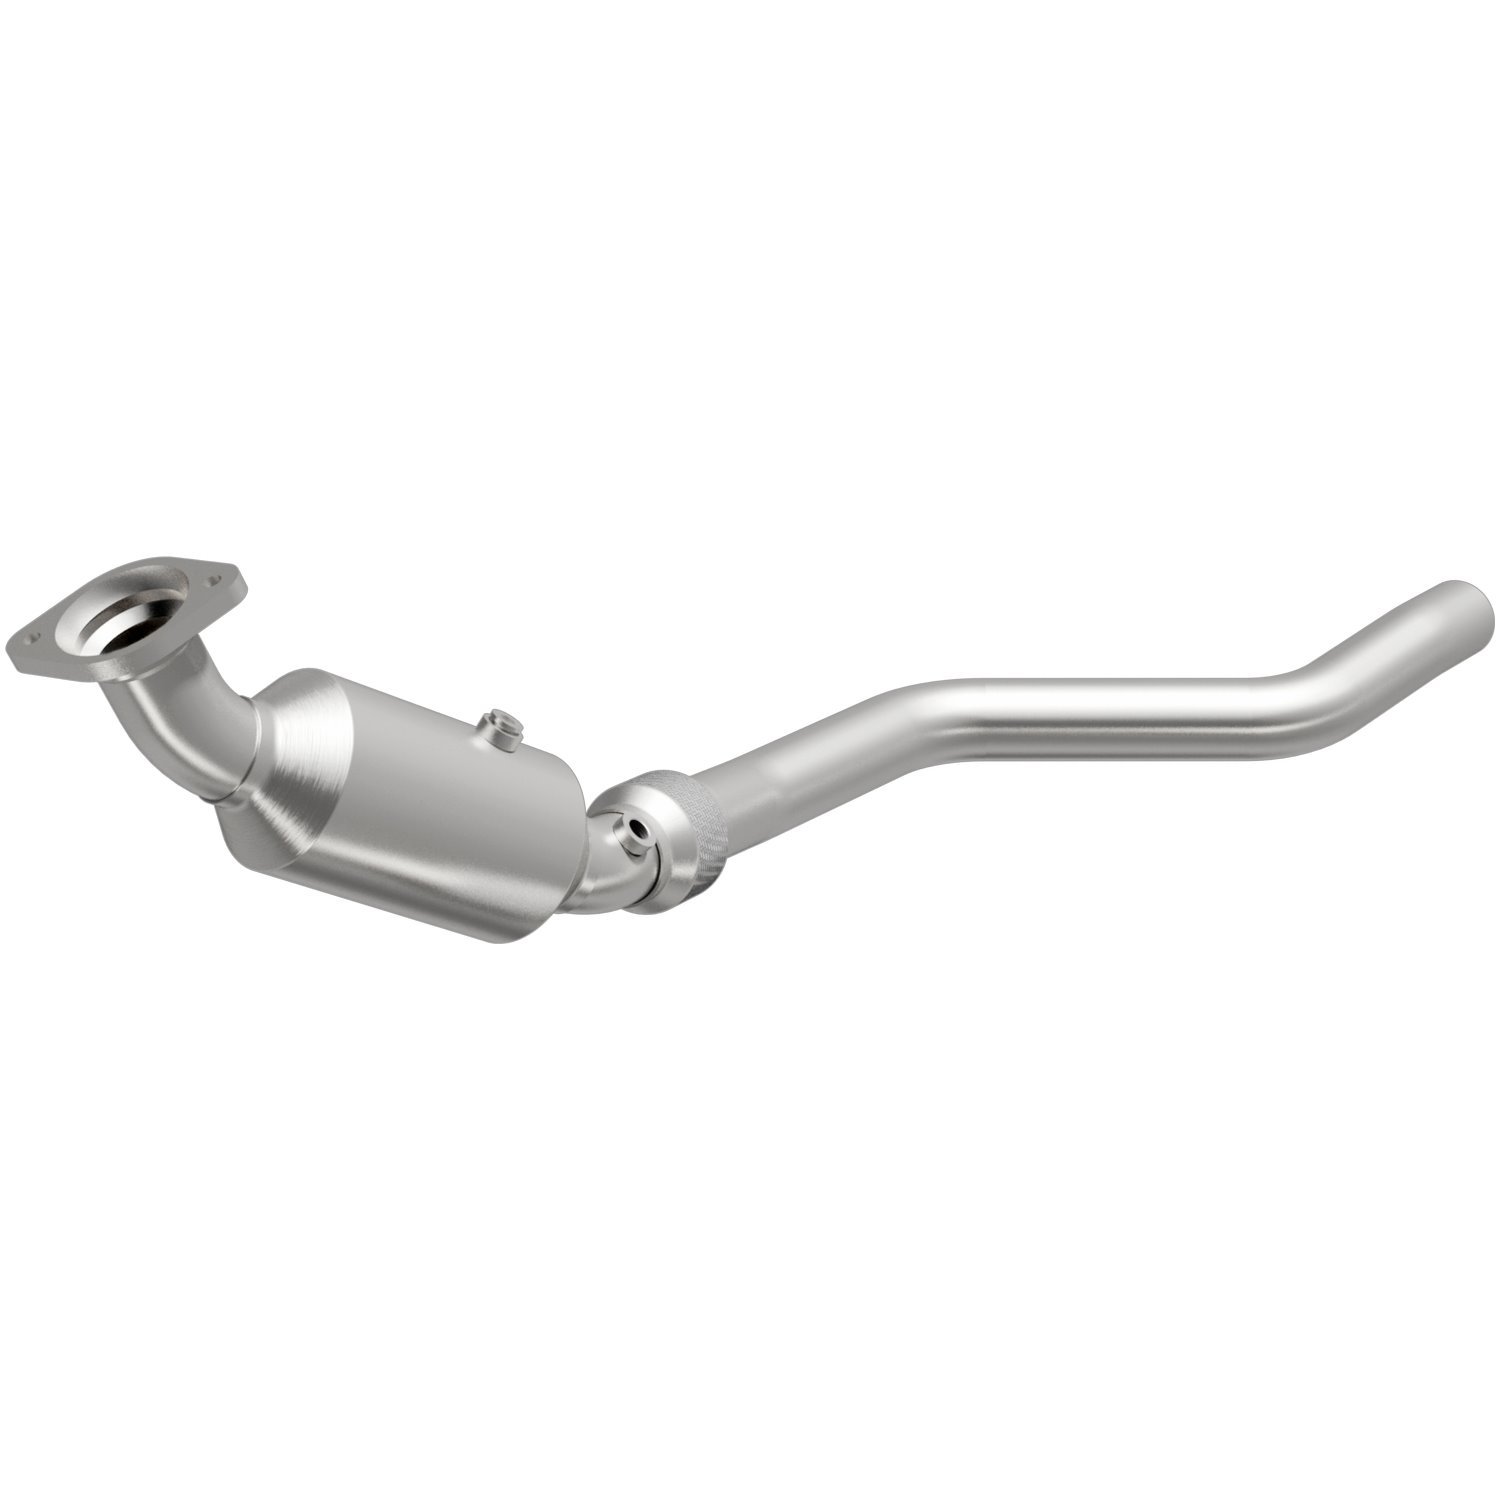 HM Grade Federal / EPA Compliant Direct-Fit Catalytic Converter 26205